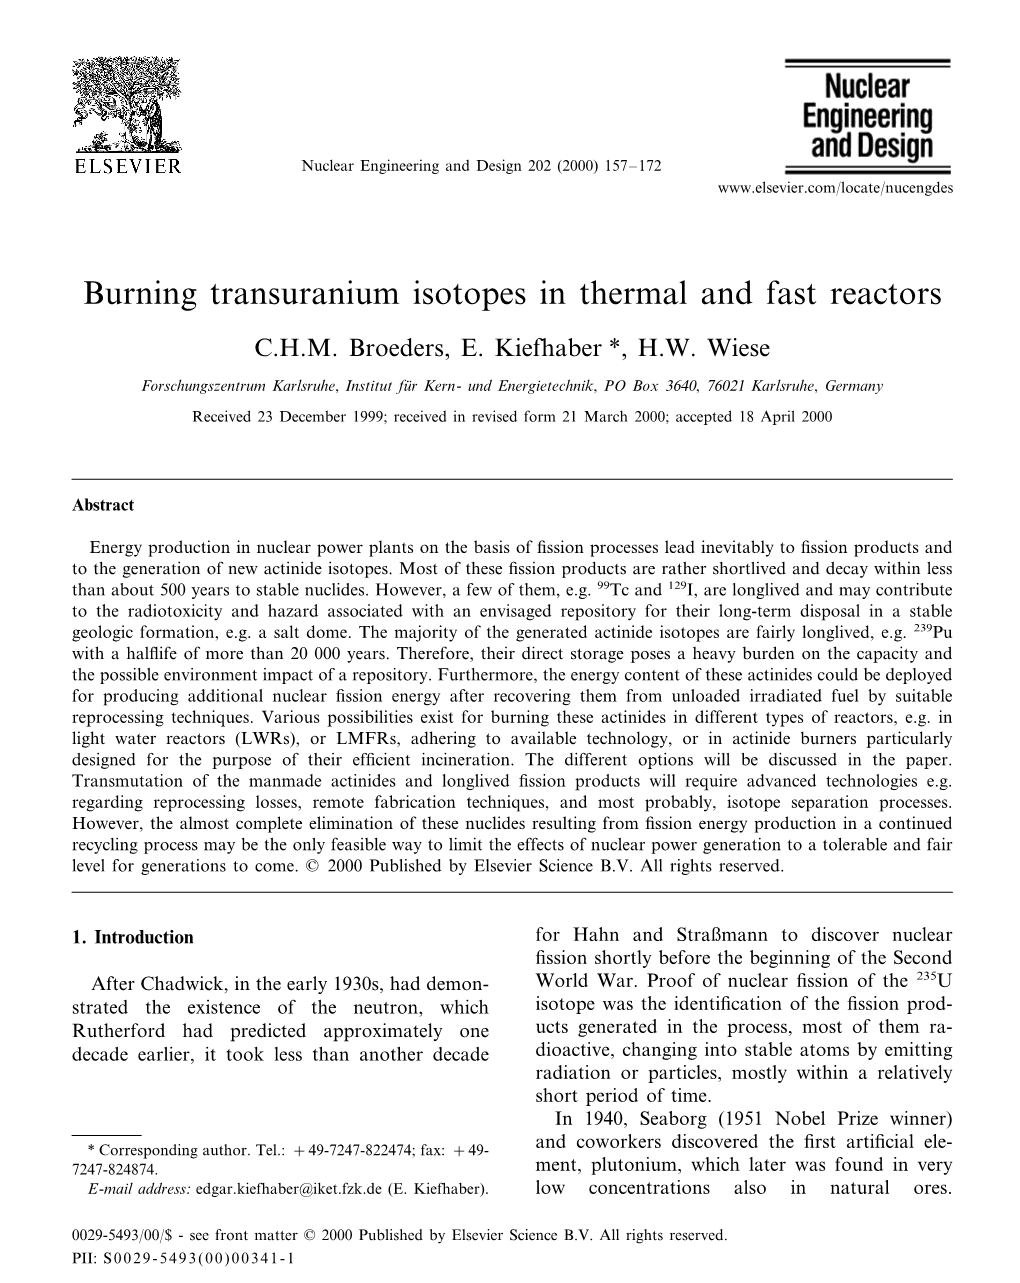 Burning Transuranium Isotopes in Thermal and Fast Reactors